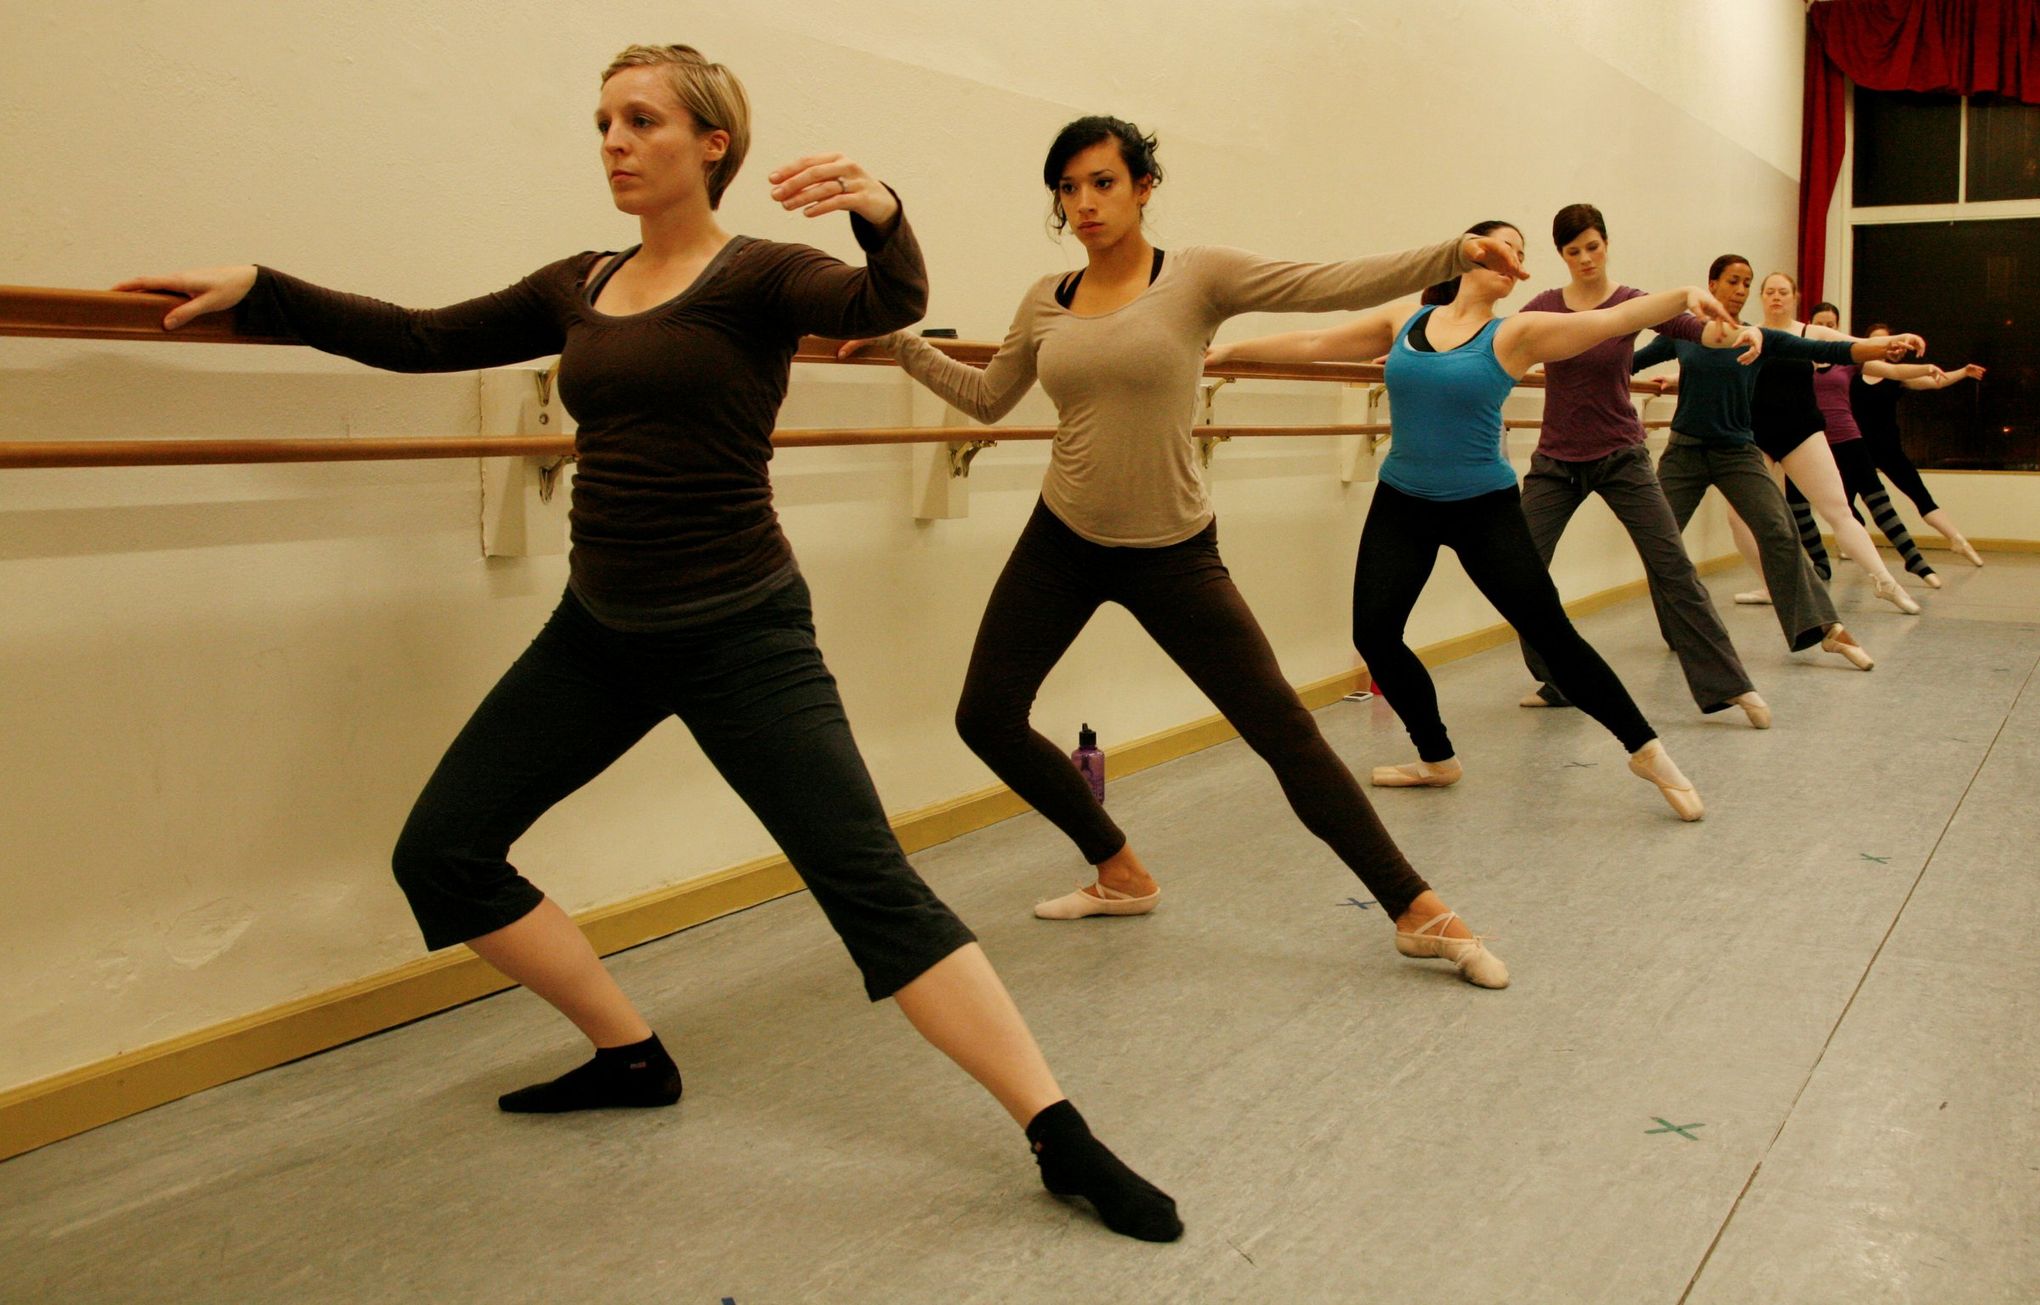 5 pro tips for your first absolutely beginning adult ballet class